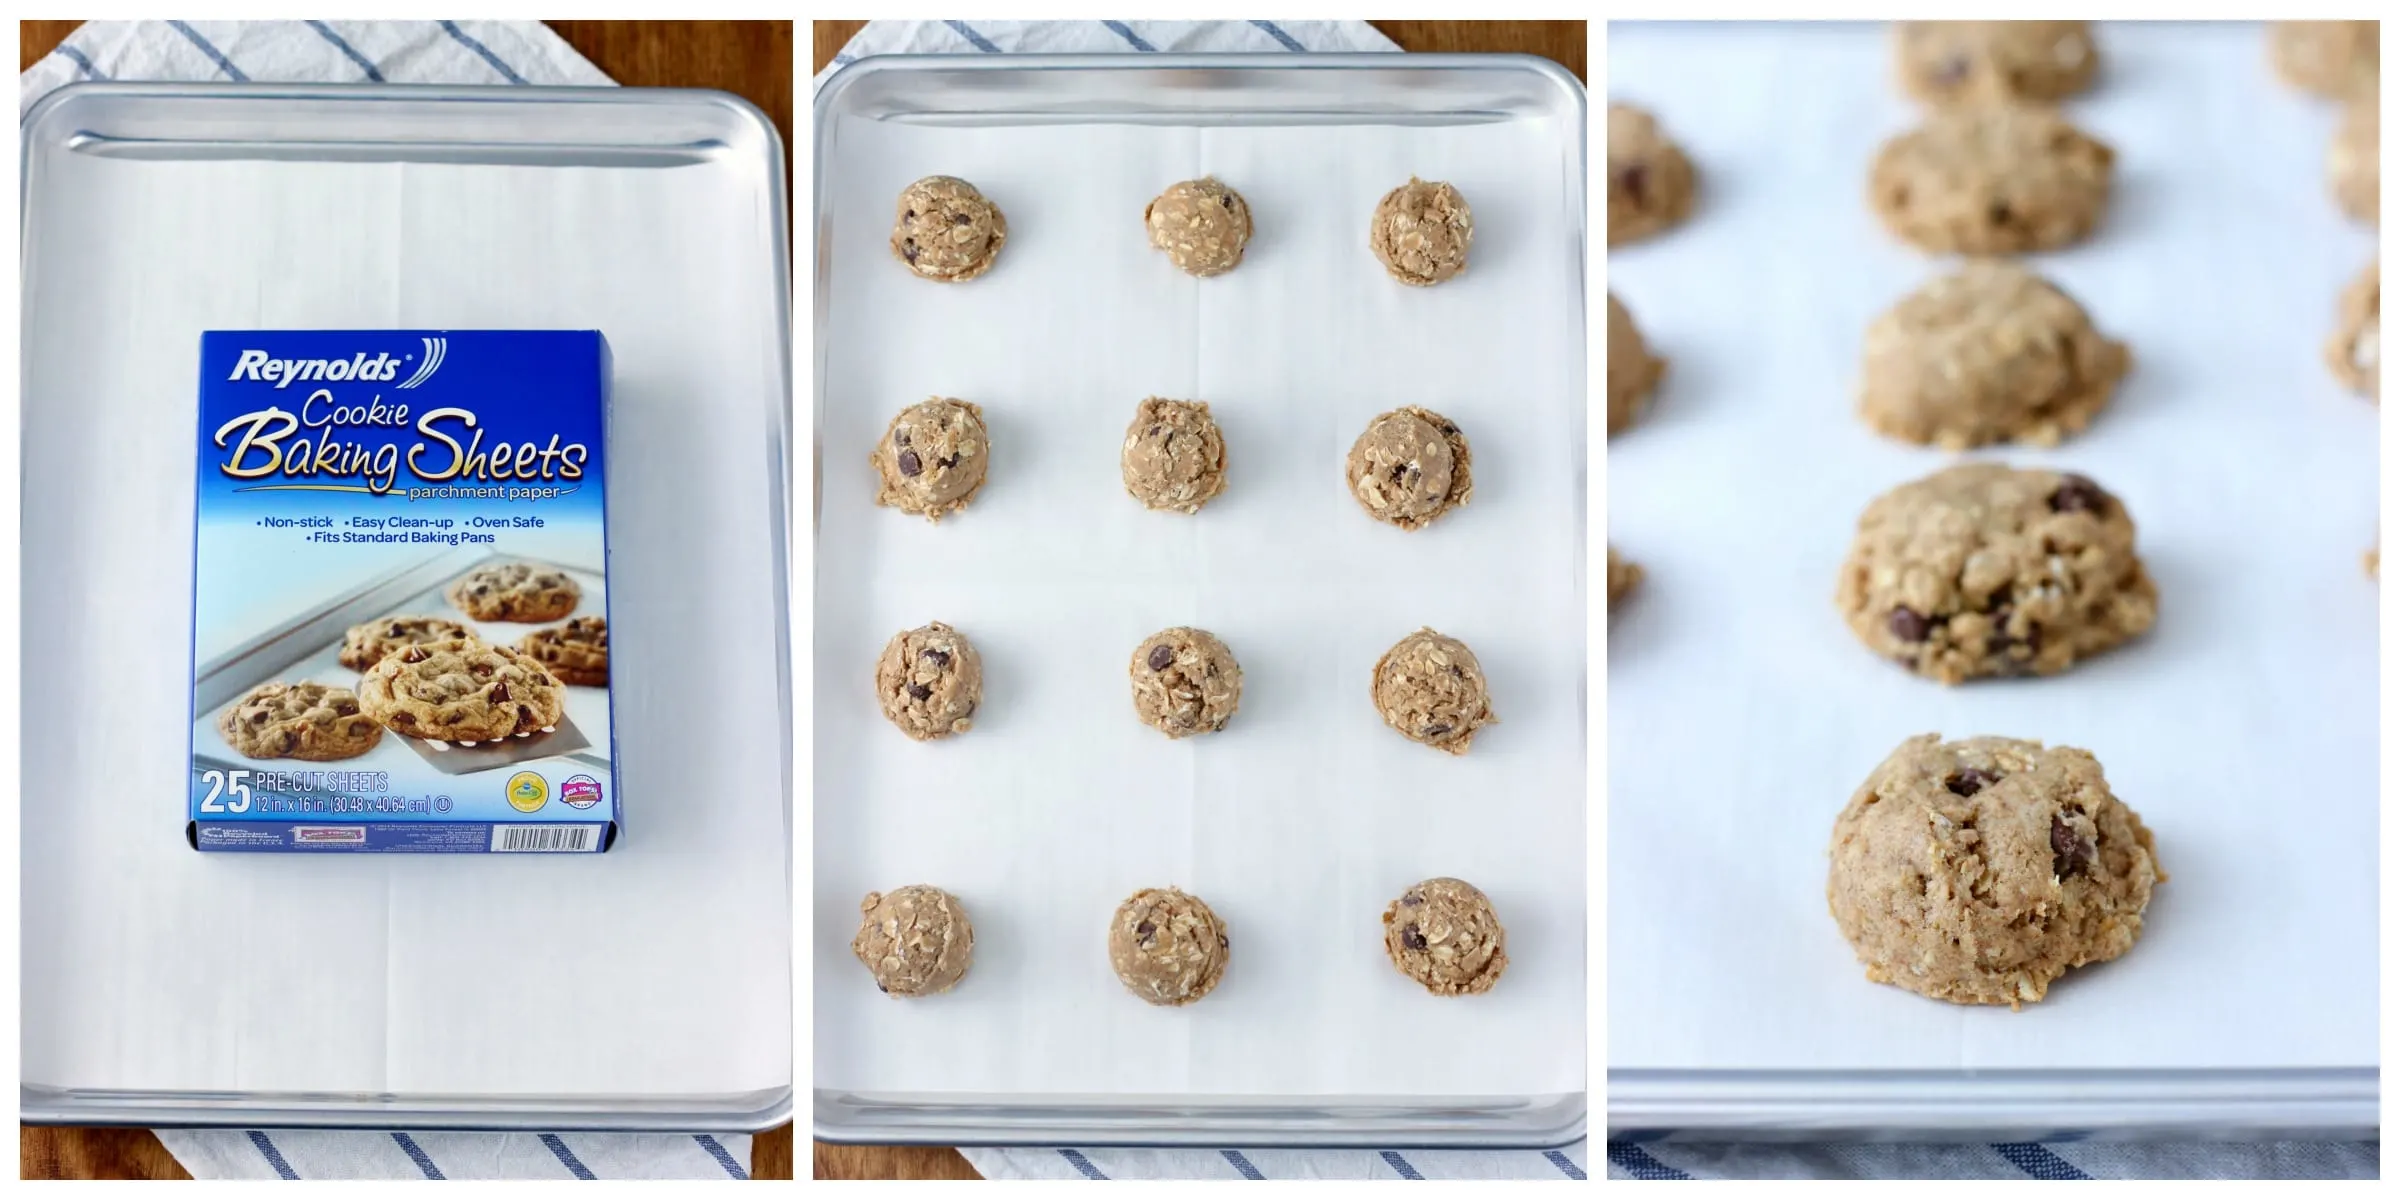 Reynolds Cookie Baking Sheets